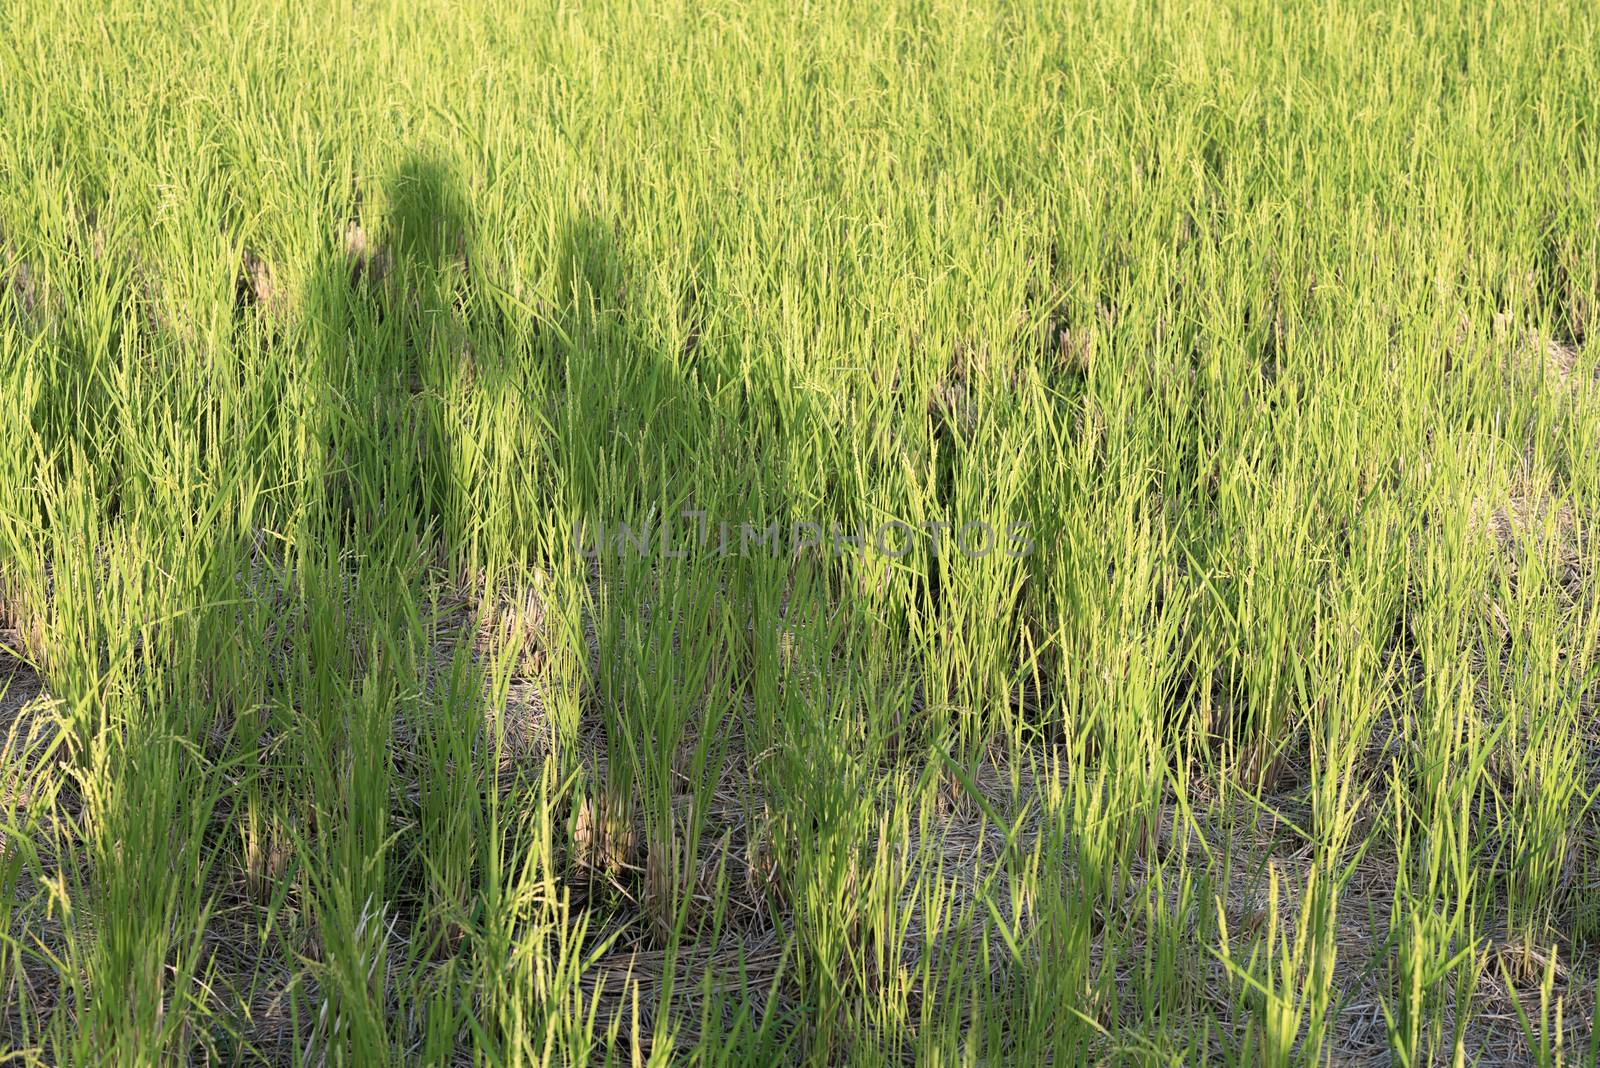 Shadow of Couple in Field by justtscott